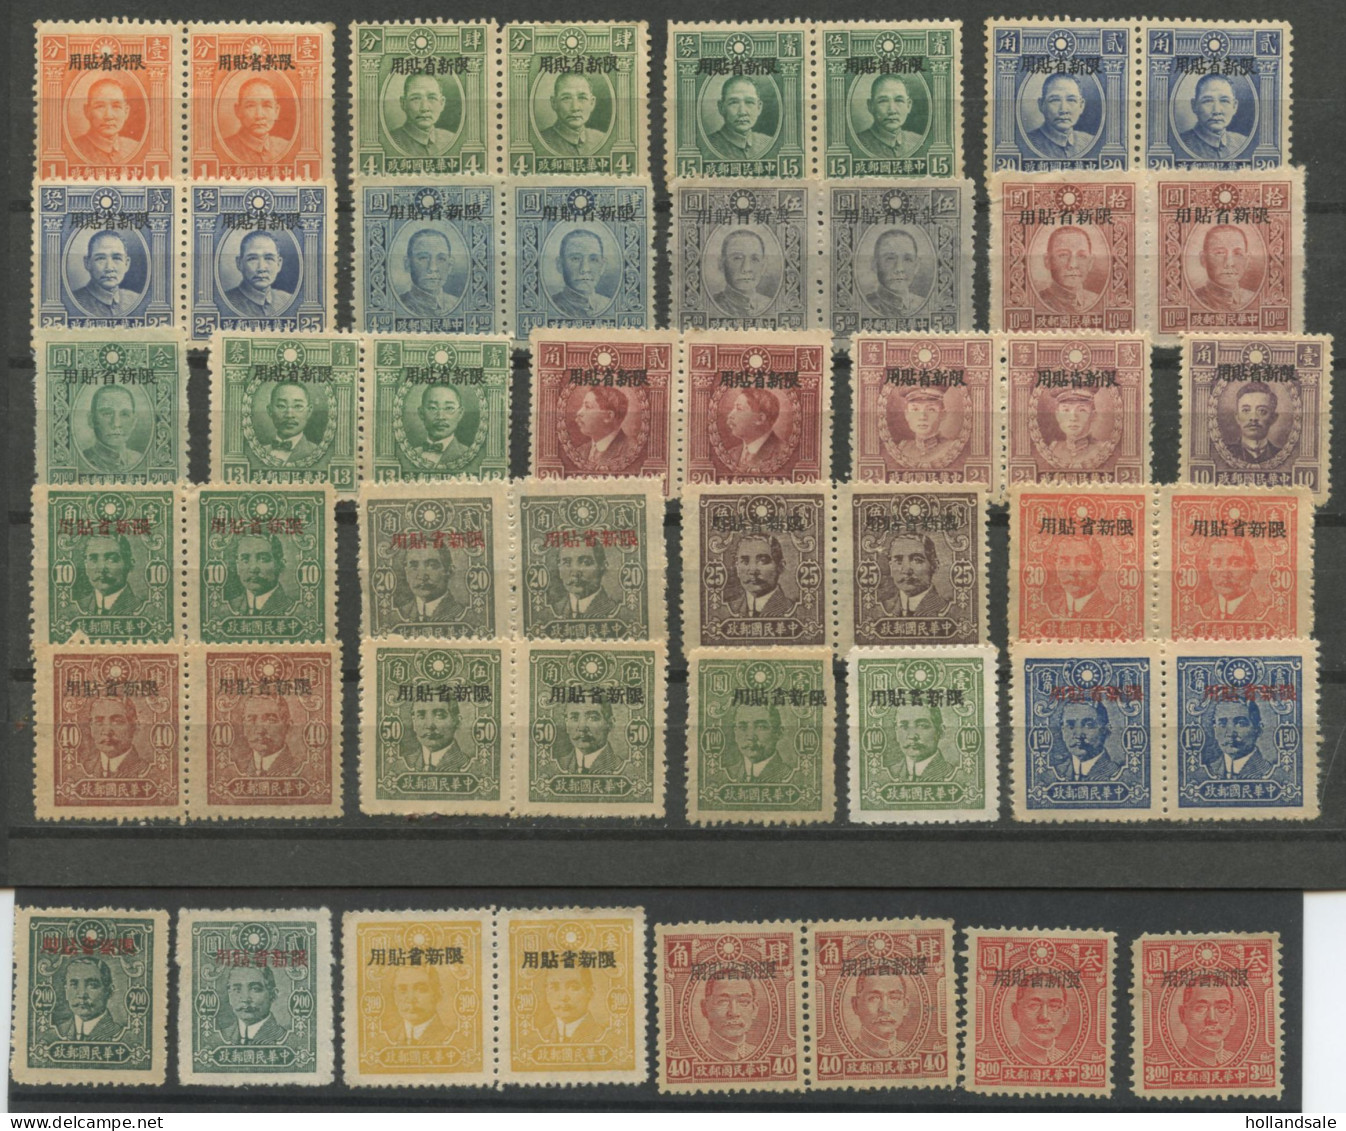 CHINA - SINKIANG - Selection Of Sinkiang Overprints. Most In Horz Pairs. Unused Without Gum. - Xinjiang 1915-49